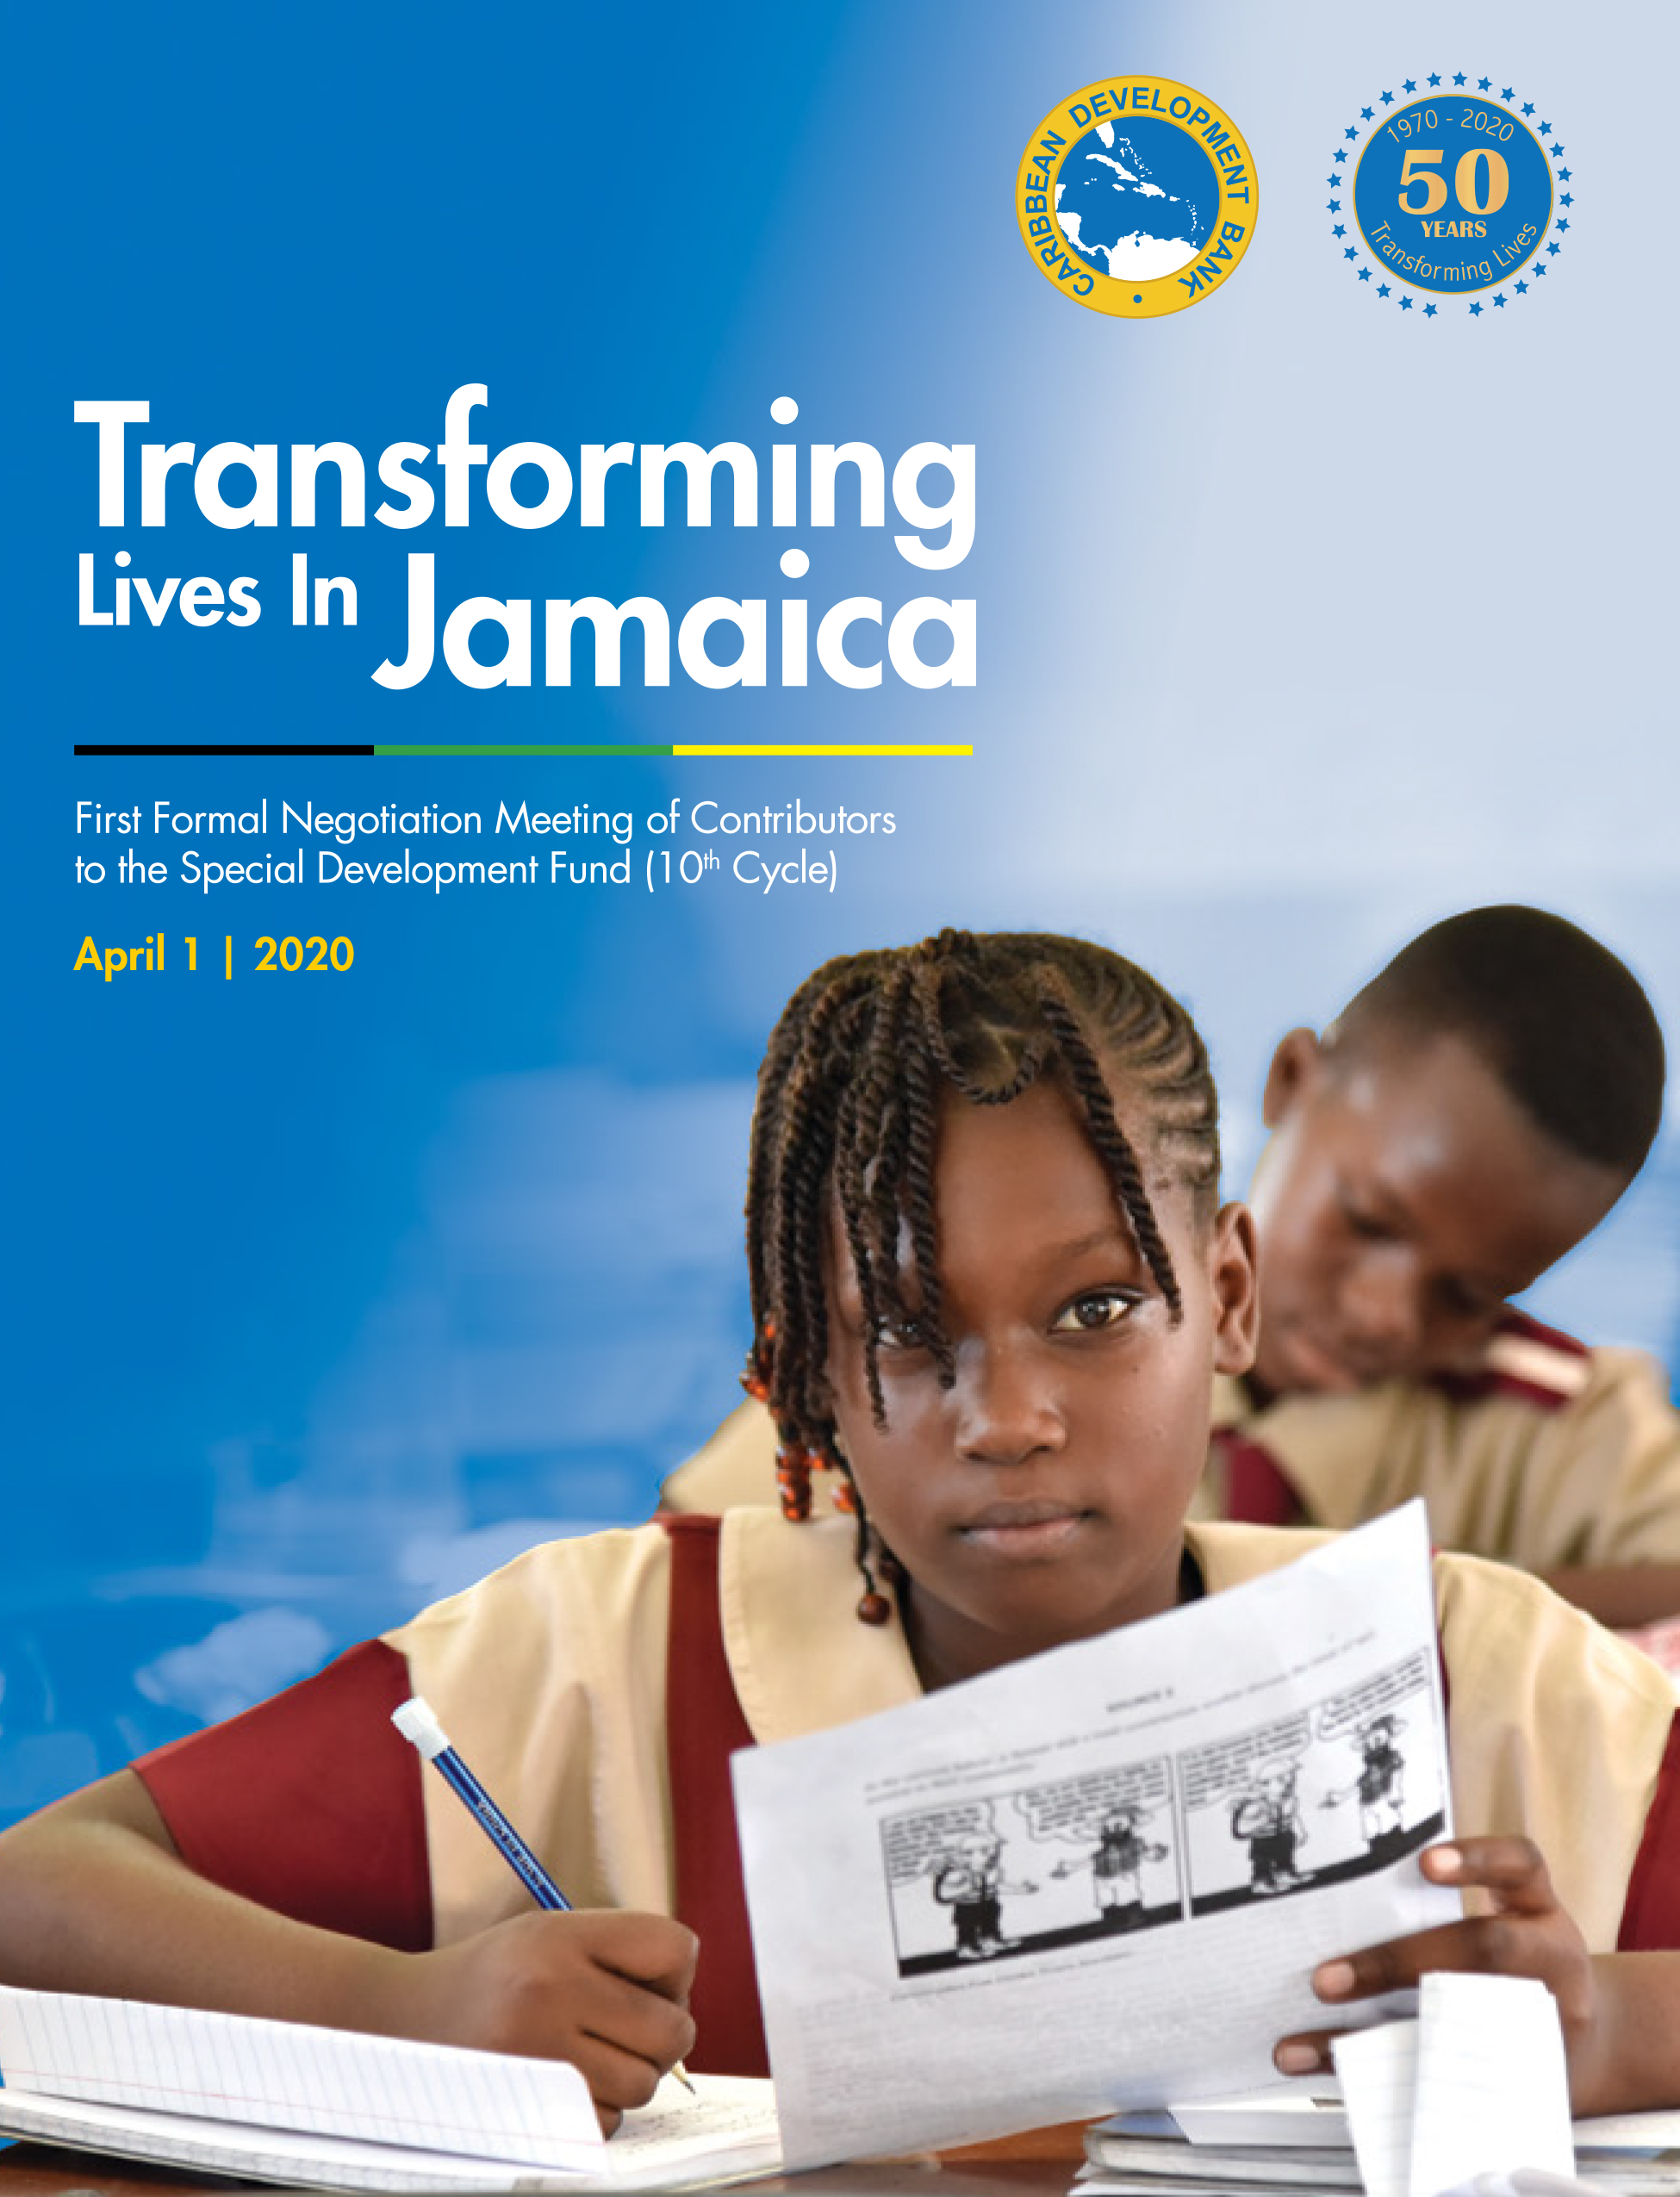 The booklet (mobile-friendly for offline reading) provides an overview on CDB Special Development Fund (SDF), the situation in Jamaica, and six stories on projects, implemented by the Basic Needs Trust Fund (BNTF), a programme of the SDF, between 2013 and 2019 in Jamaica.  

https://www.caribank.org/sites/default/files/publication-resources/SDF Project Booklet final.pdf

